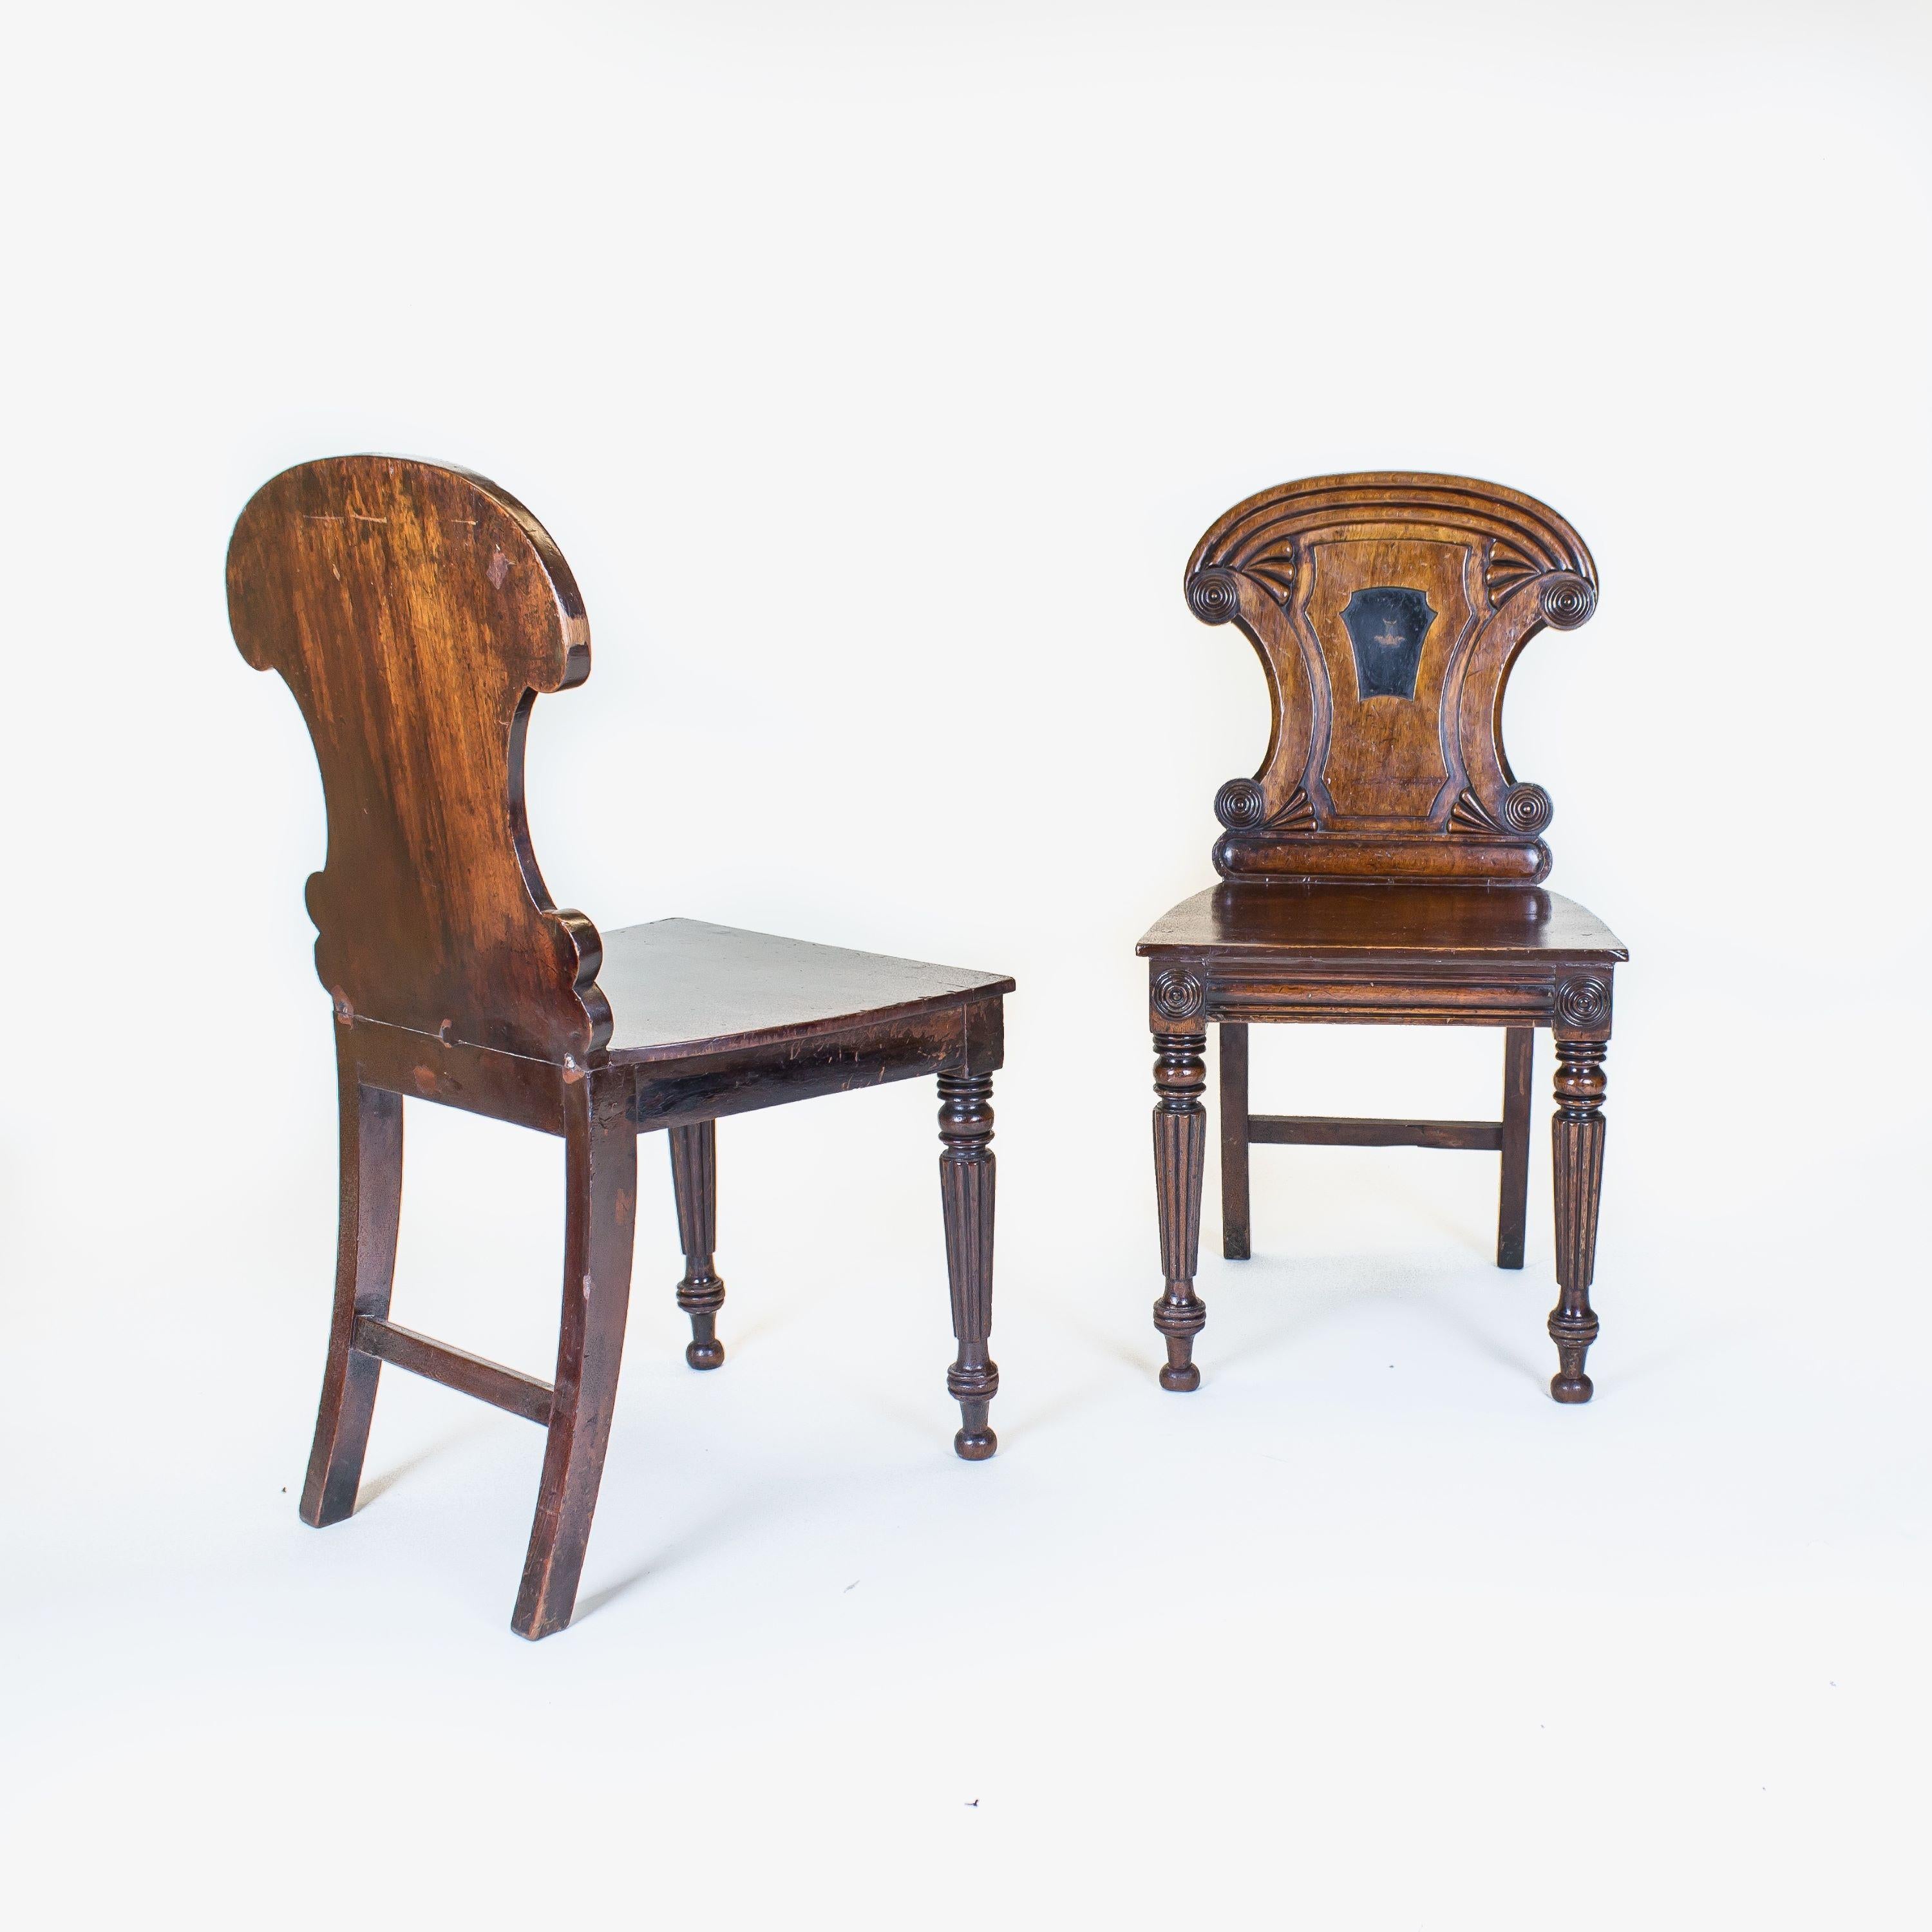 The waisted backs with turned roundels and a central ebonised reserve. Probably by Gillows.

England, circa 1825